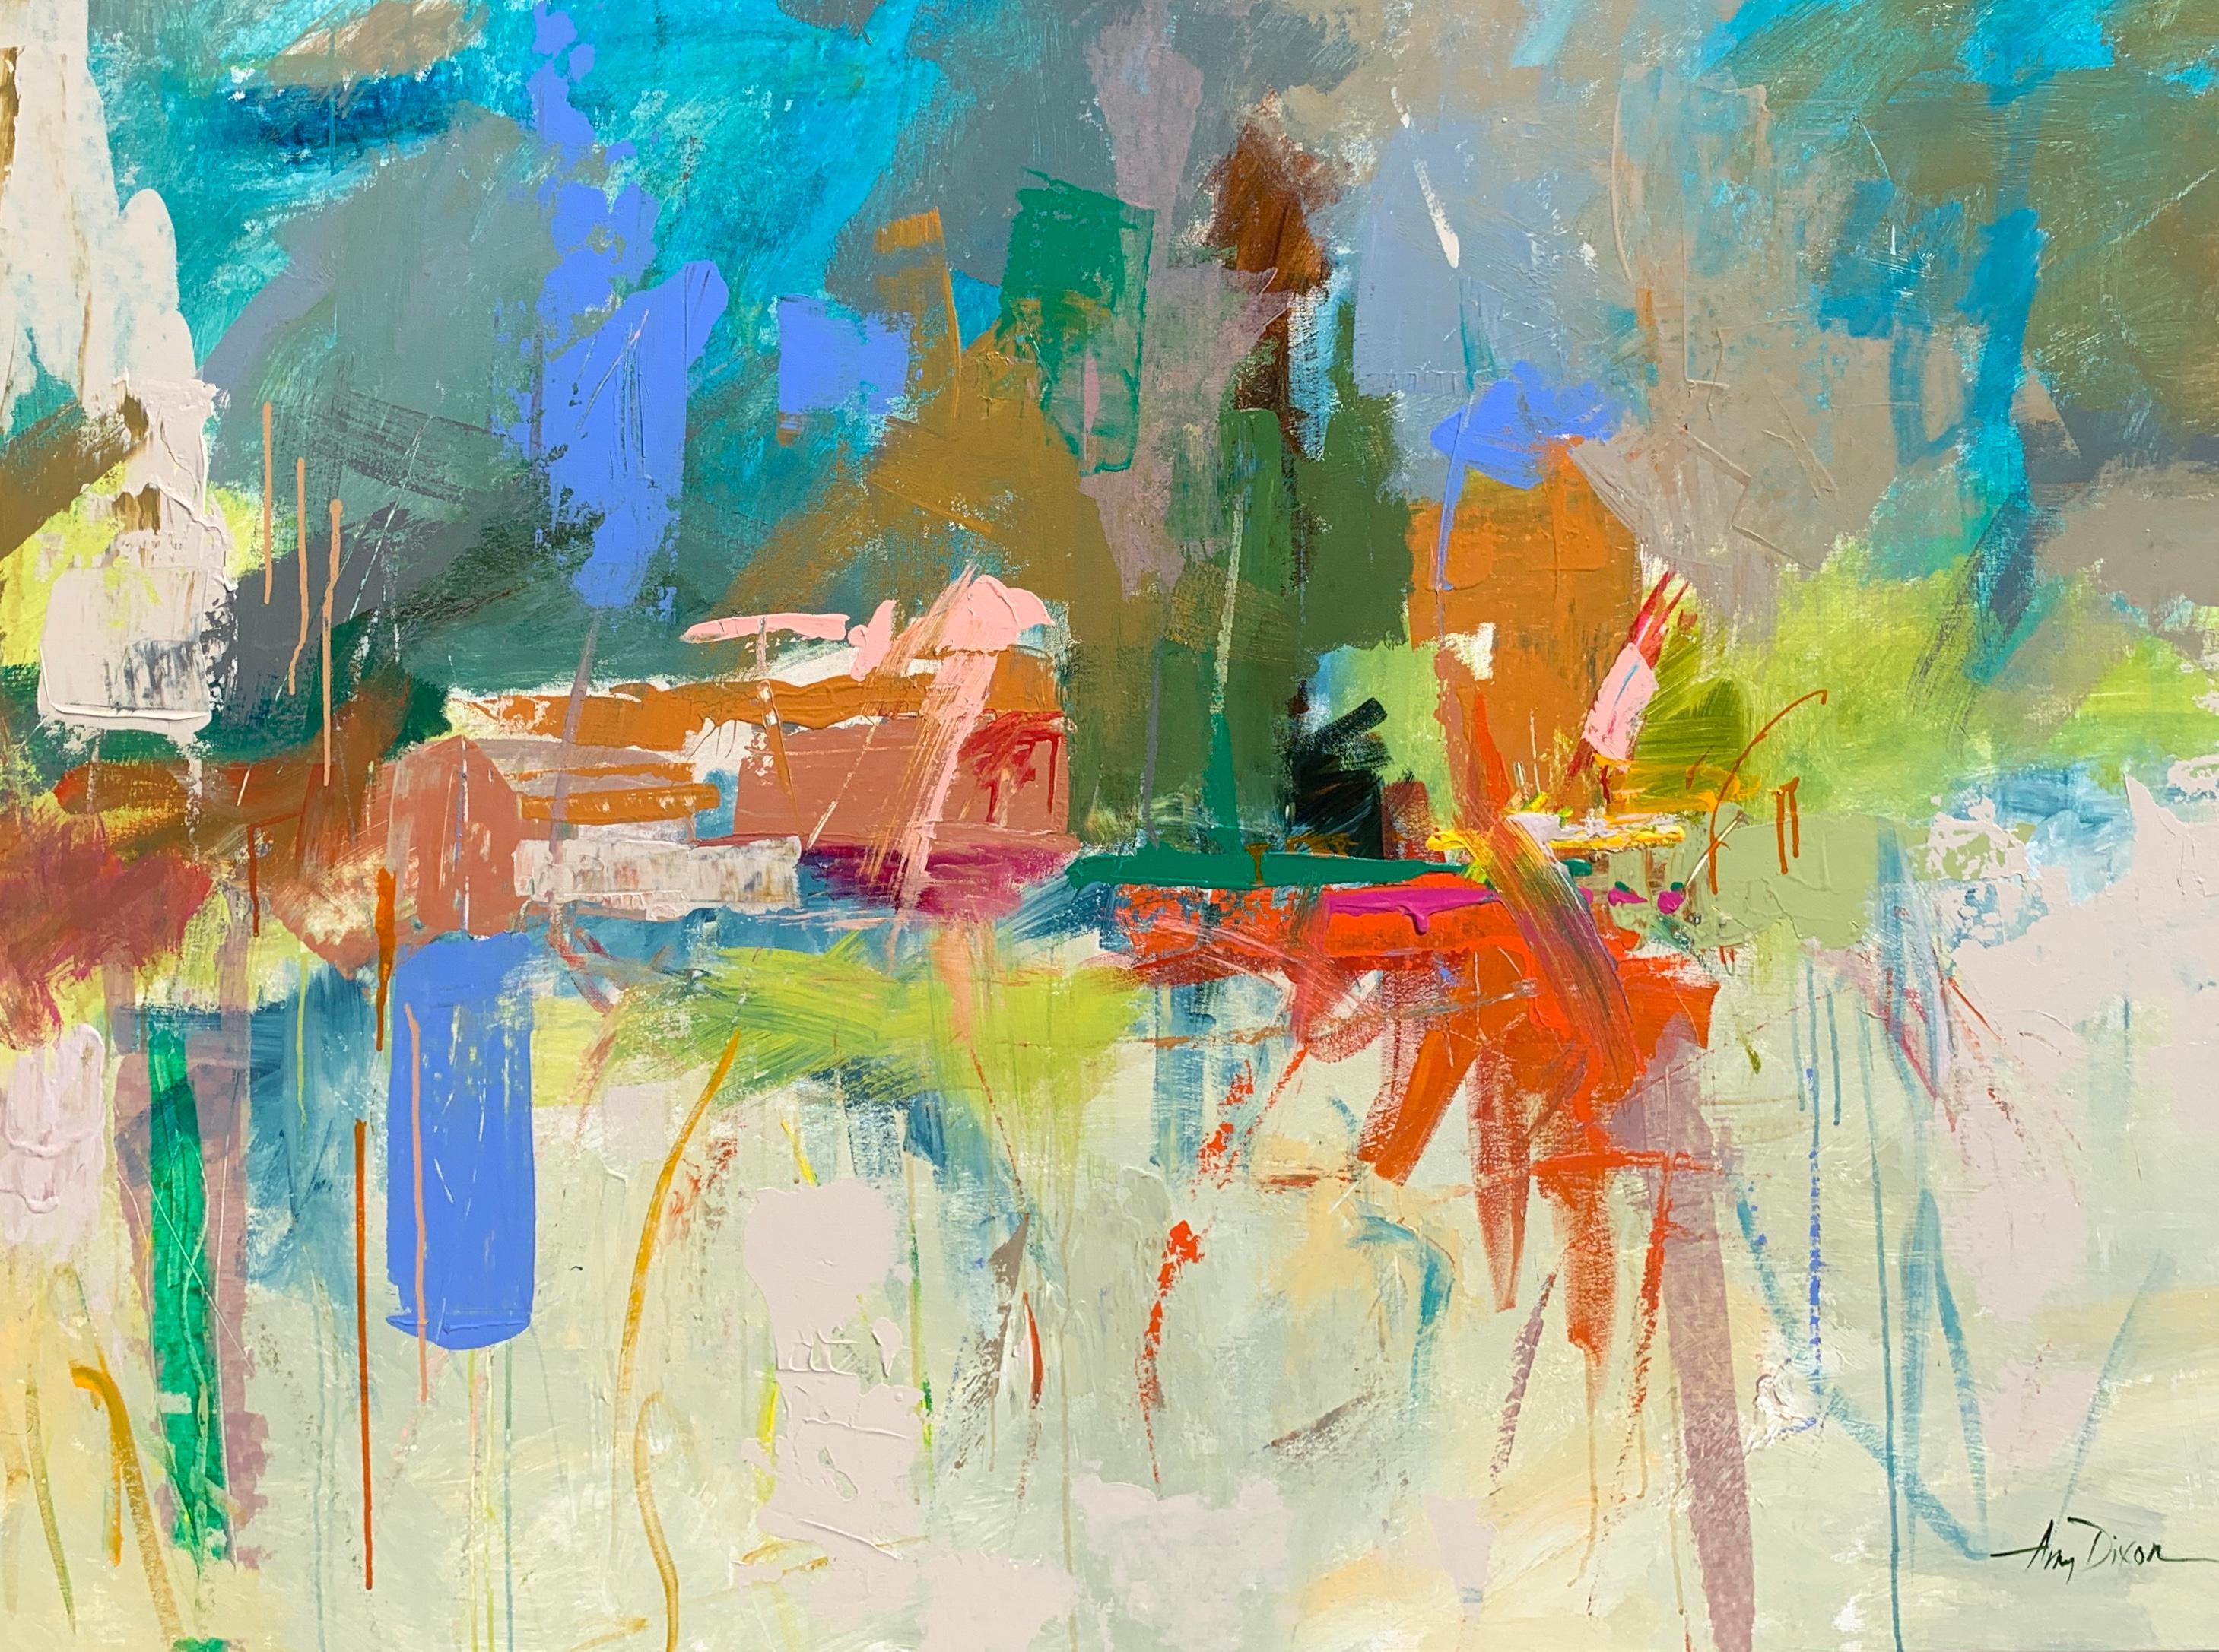 'Let There Be Light' is an abstract acrylic and ink on canvas painting created in 2020 by American artist Amy Dixon. Featuring a horizontal format, this painting showcases a palette made of a variety of colors that include greens, turquoises and